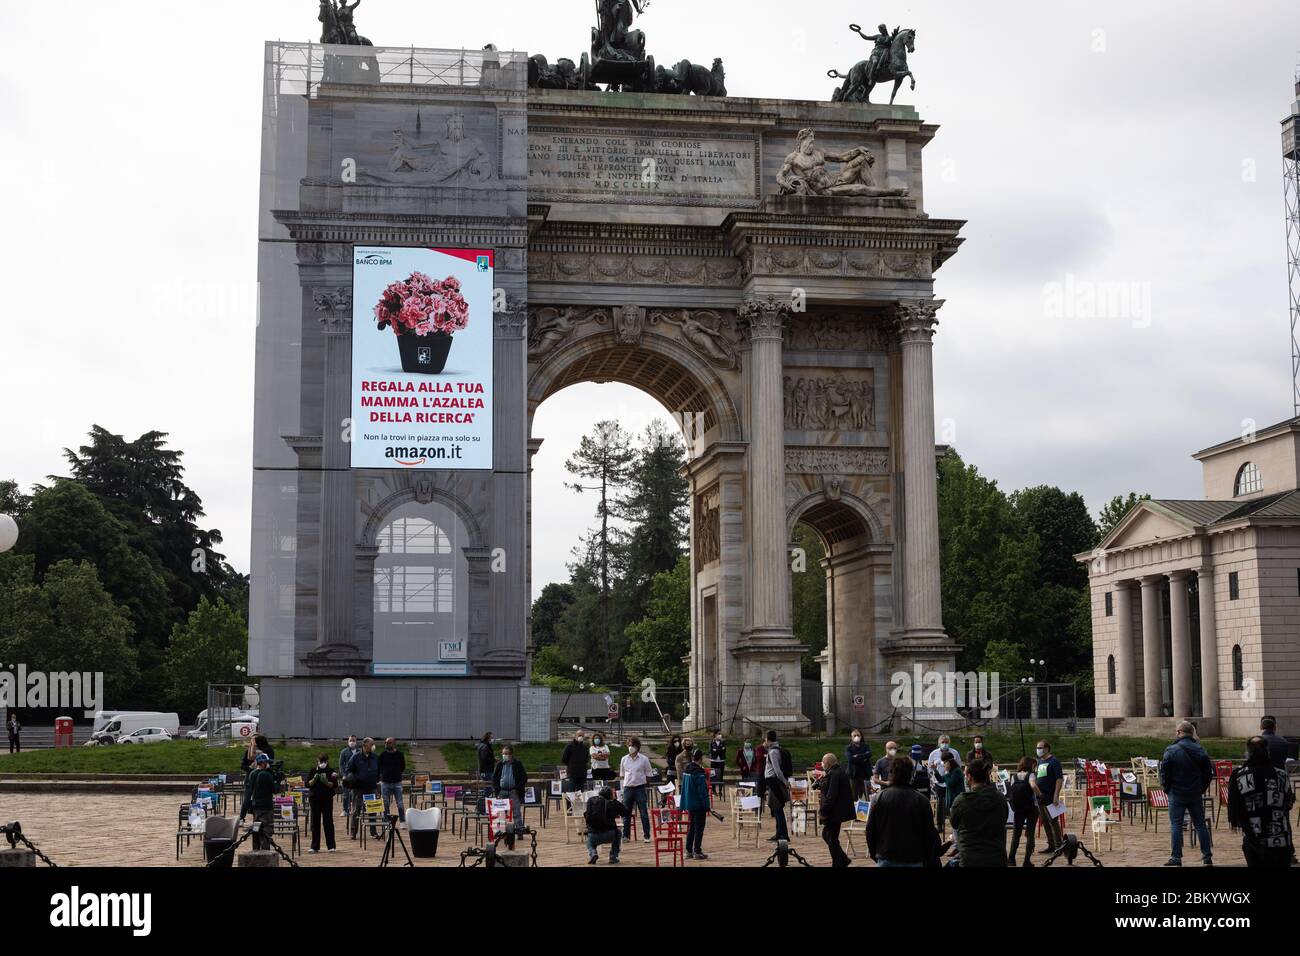 Milan, May 6, 2020. Protest of shopkeepers under the Arco della Pace. With the slogan "if we open, we fail", the shopkeepers decide to cross their arms and go on strike against government measures and funds that do not arrive or that are too few to make up for the current crisis. Stock Photo